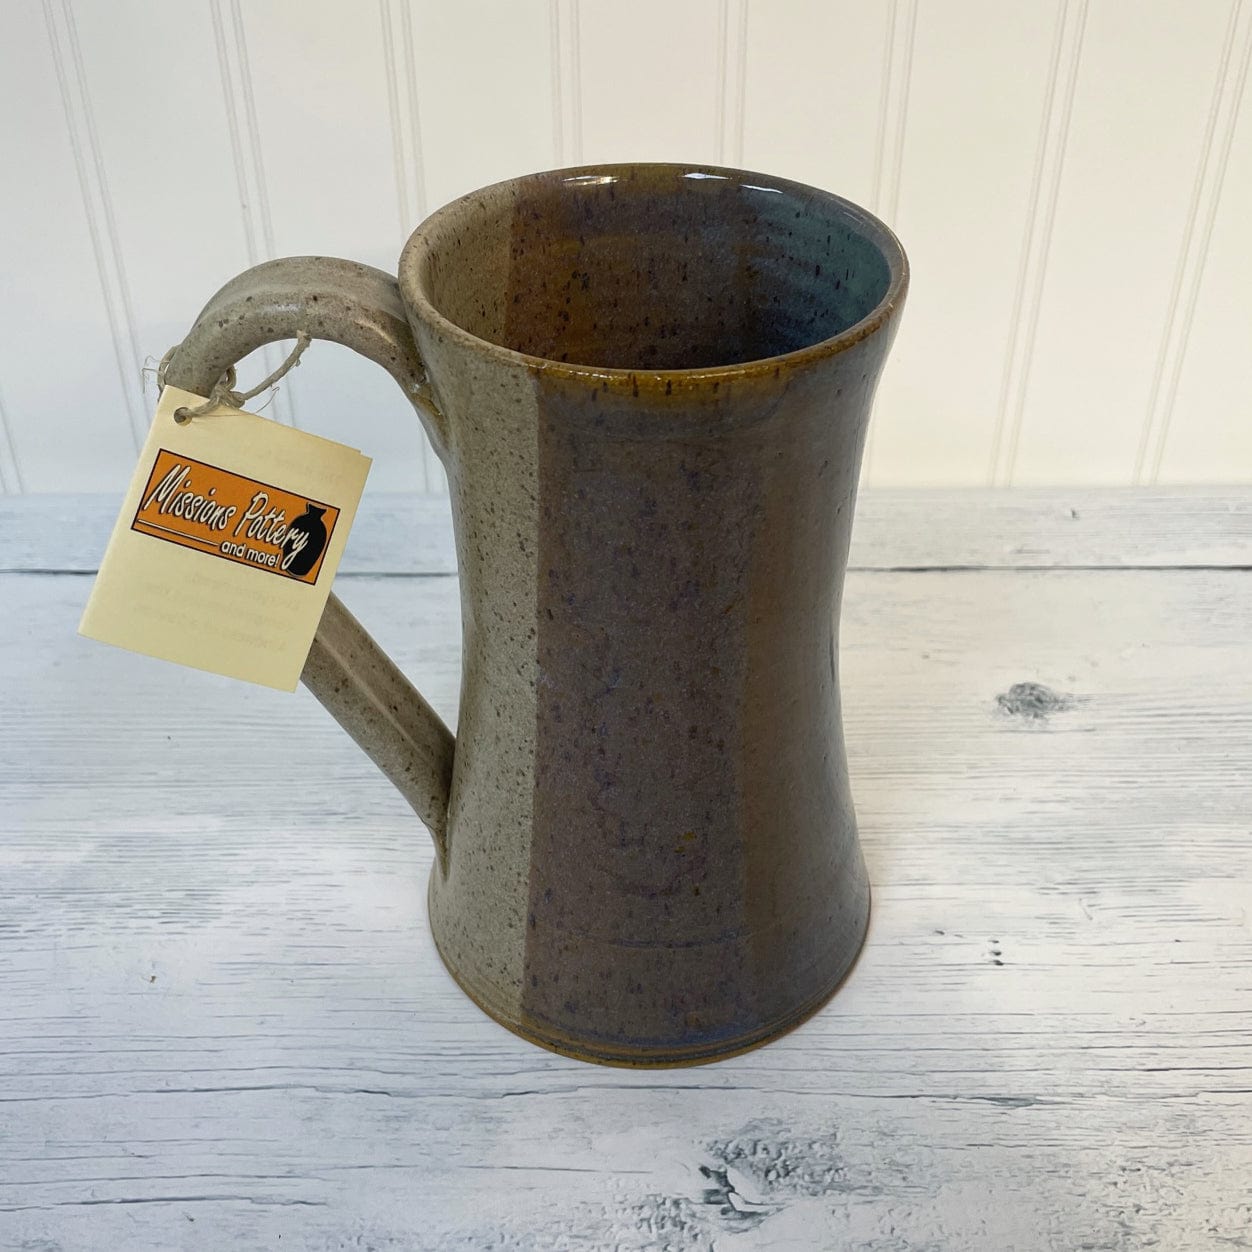 Missions Pottery Missions Pottery XL Coffee Mug